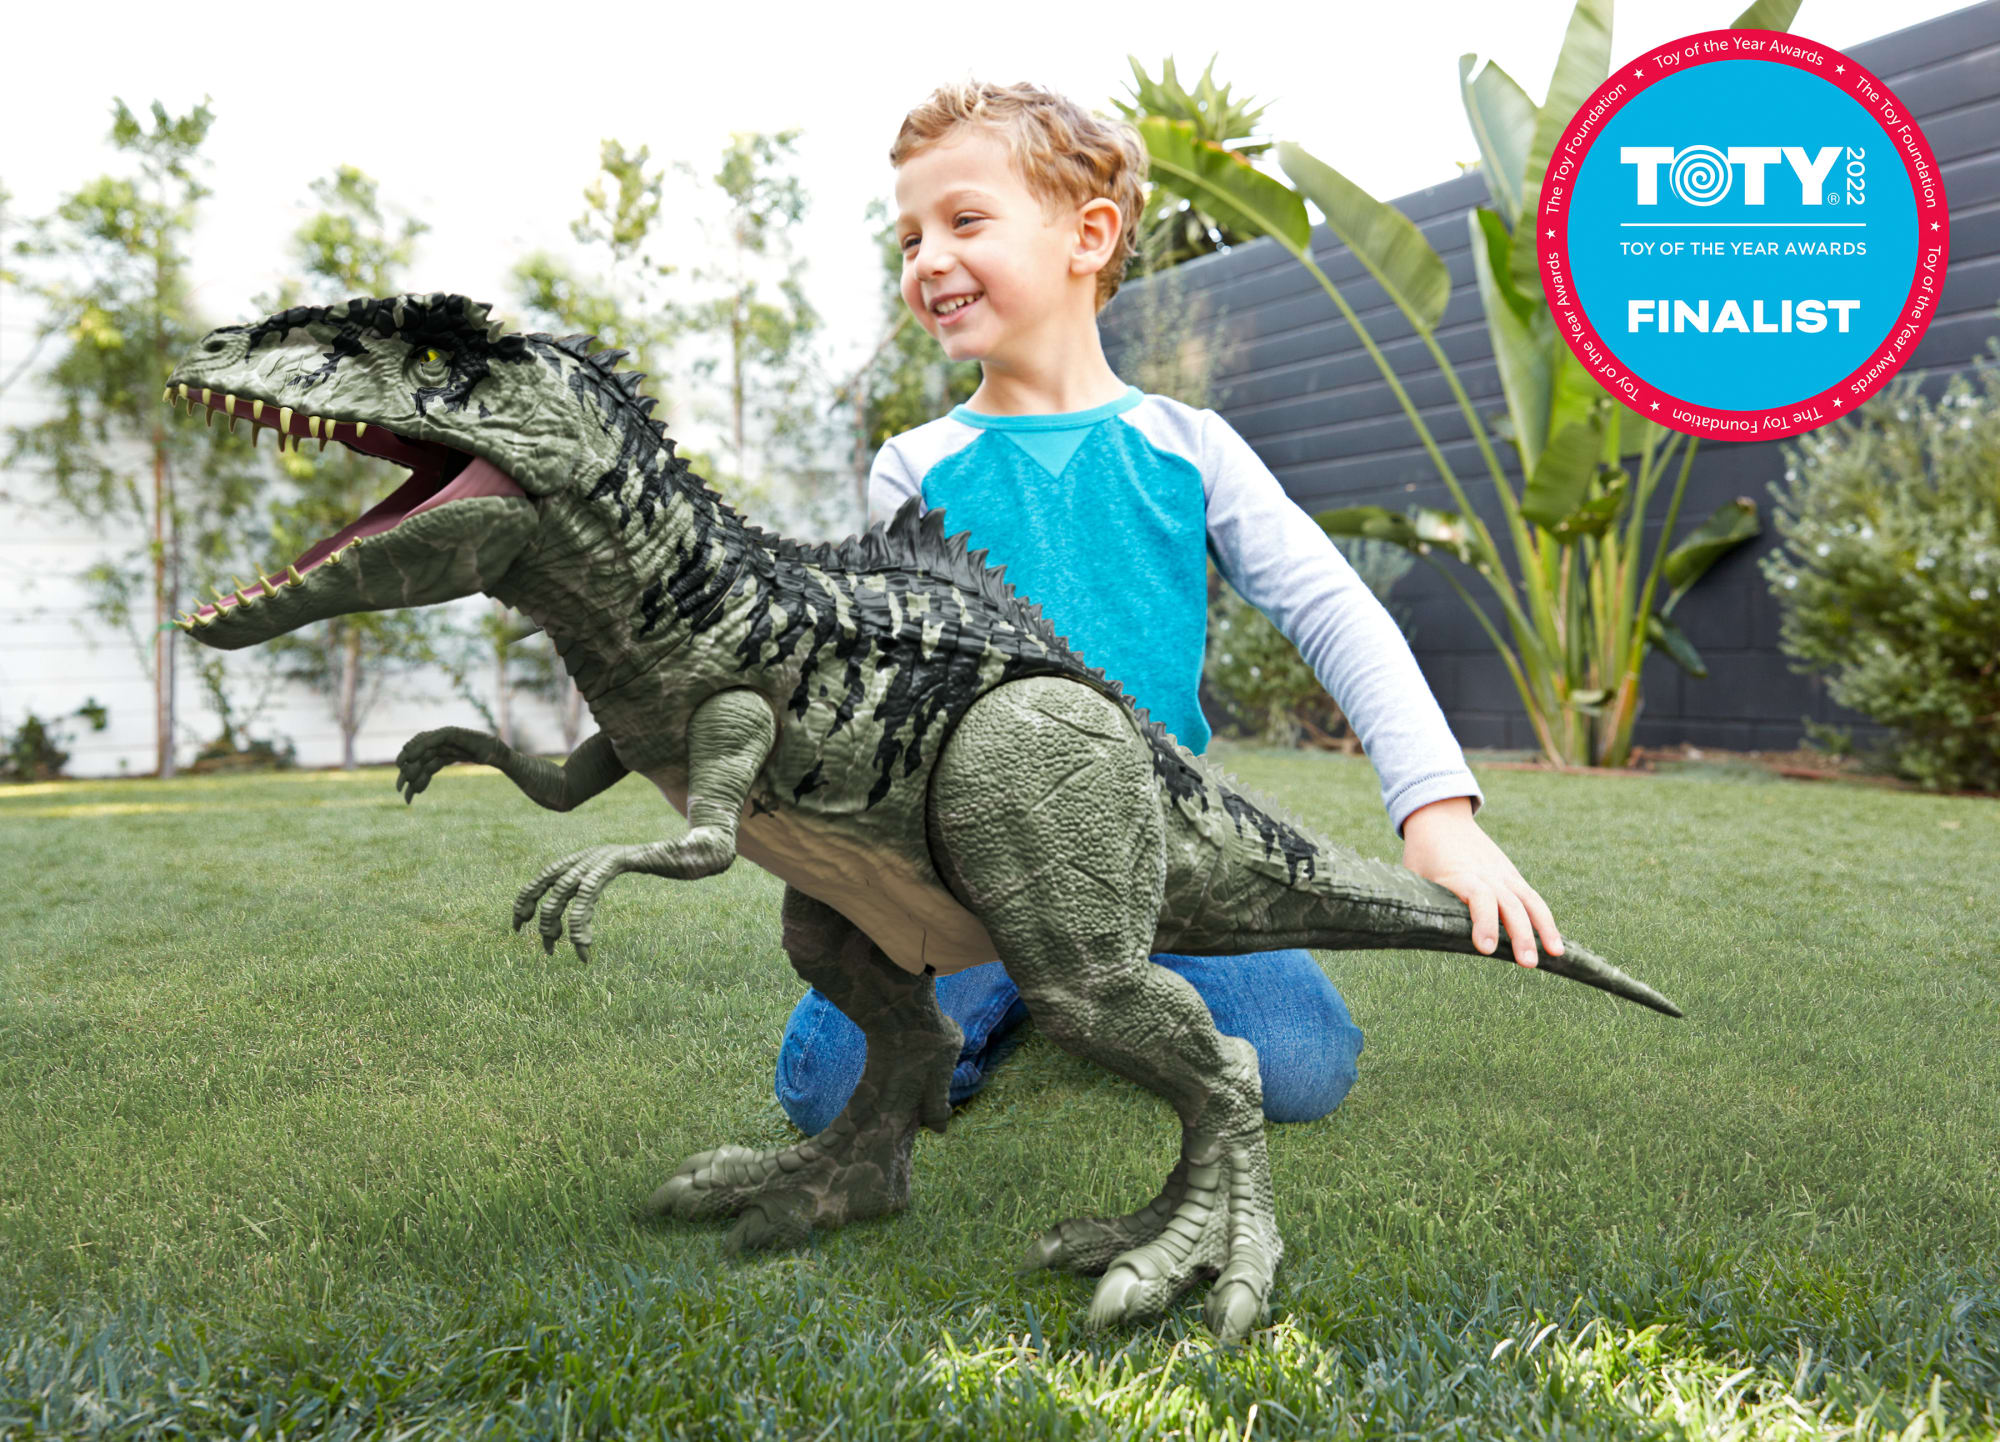 Mattel Jurassic World Dominion Super Colossal Tyrannosaurus Rex Action  Figure, Extra Large Dinosaur Toy at 41.5 Inches with Movable Joints and  Eating